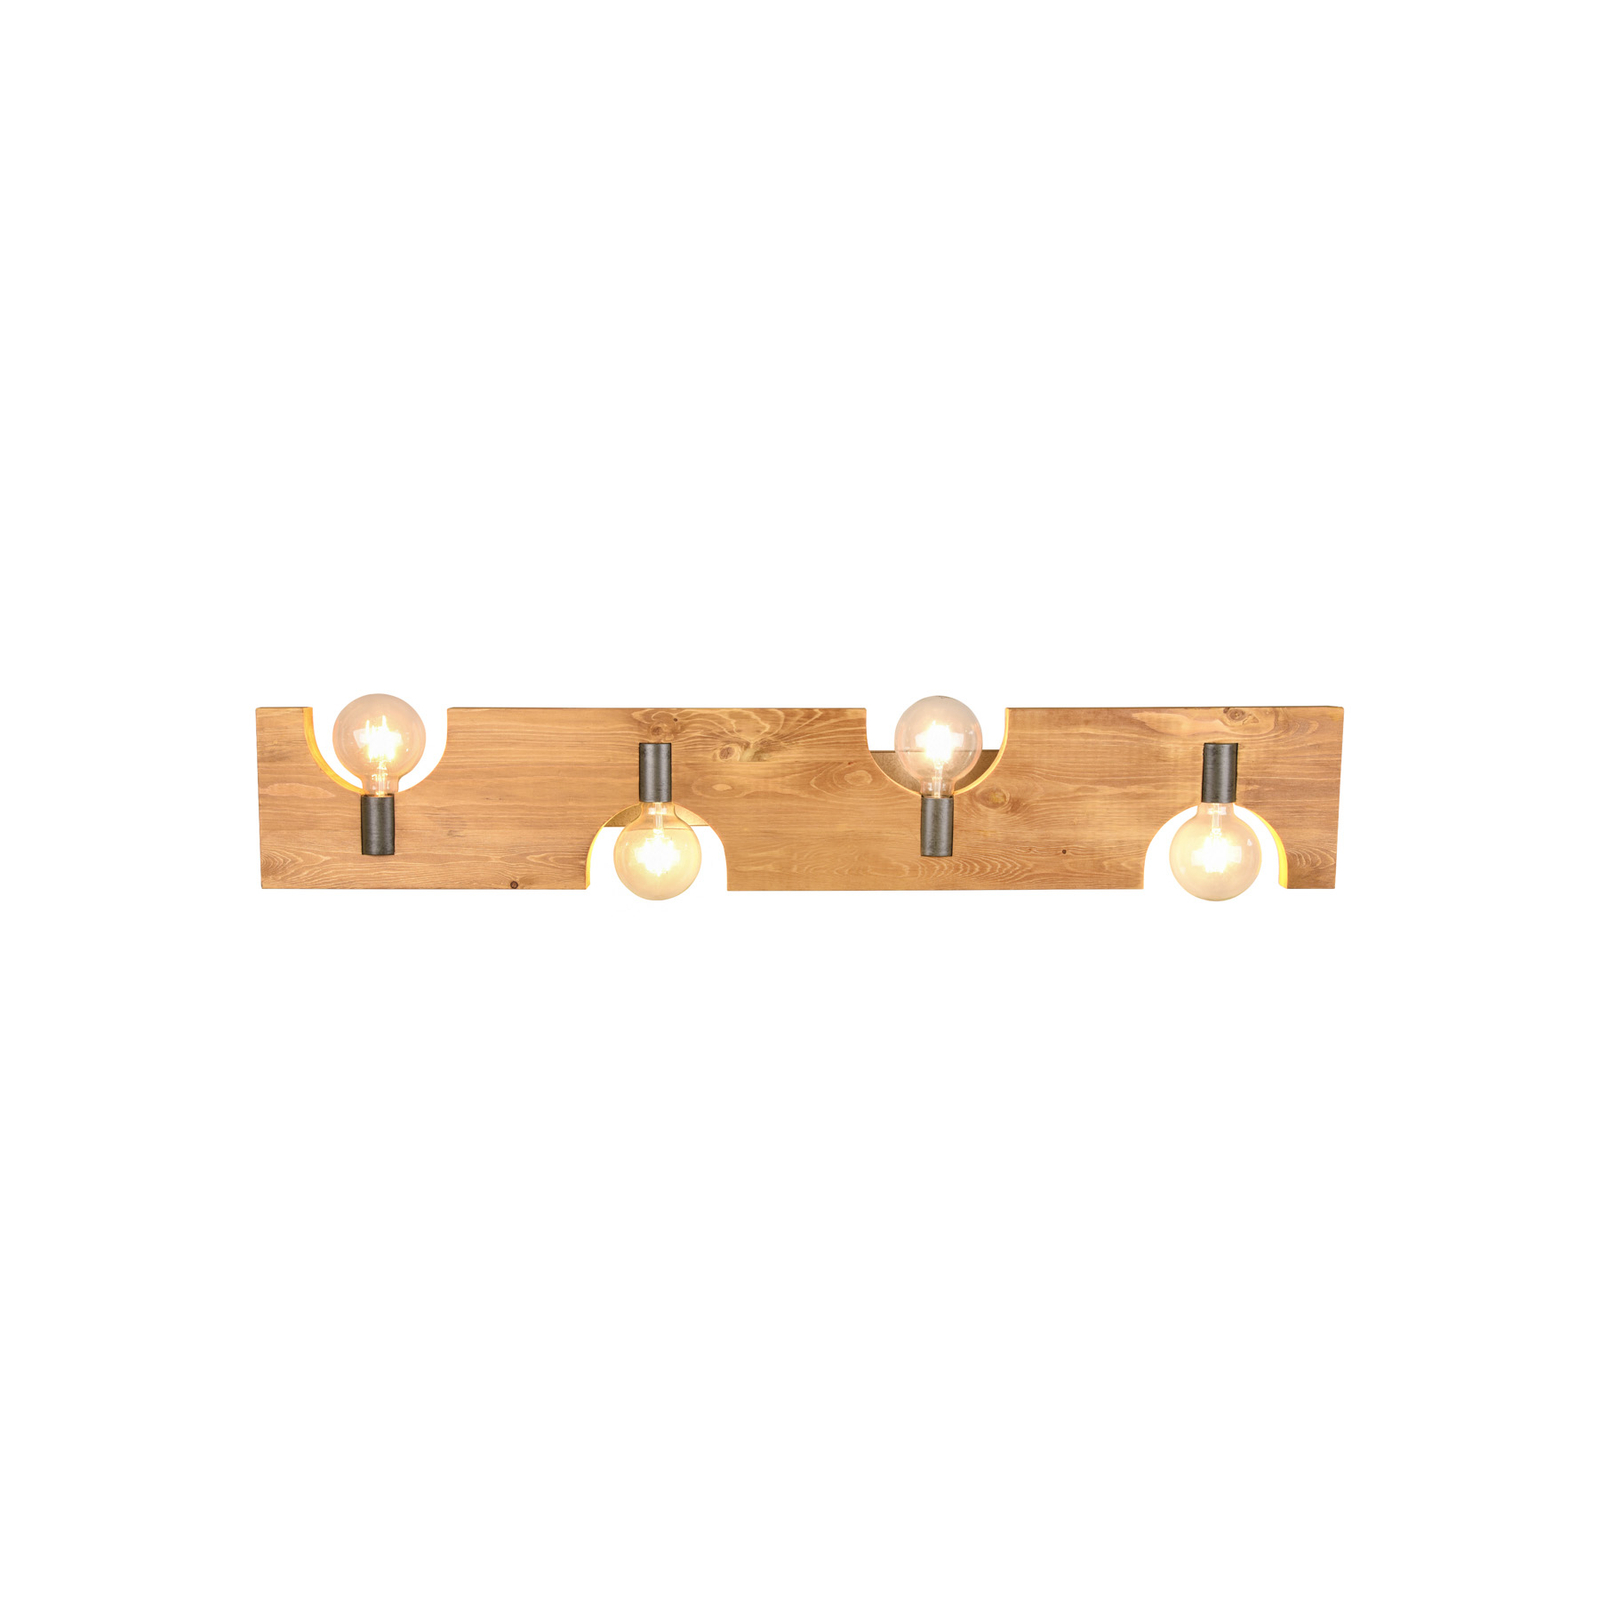 Tailor ceiling light made of wood, 4-bulb